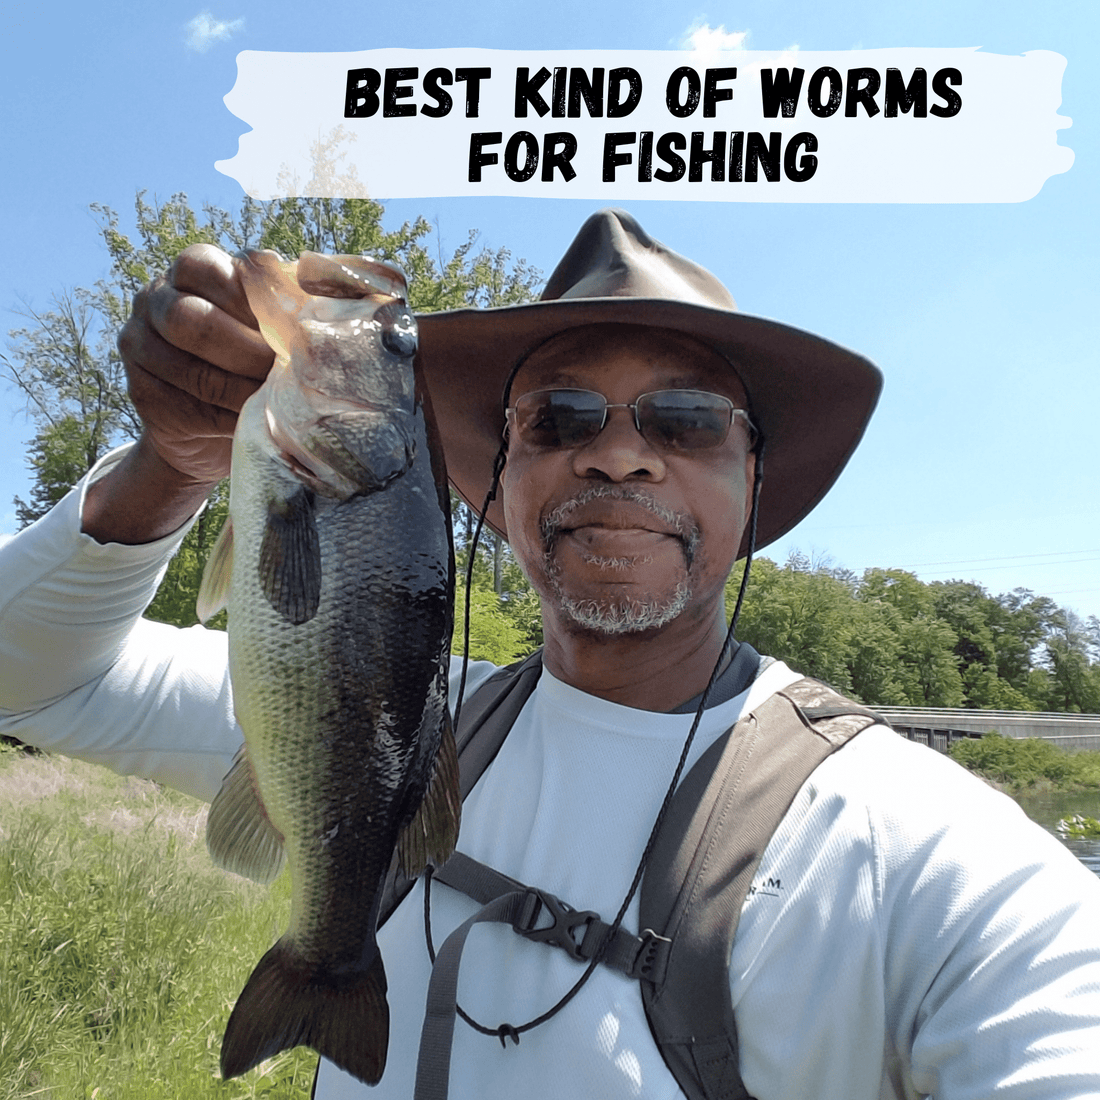 Best kind of worms for fishing